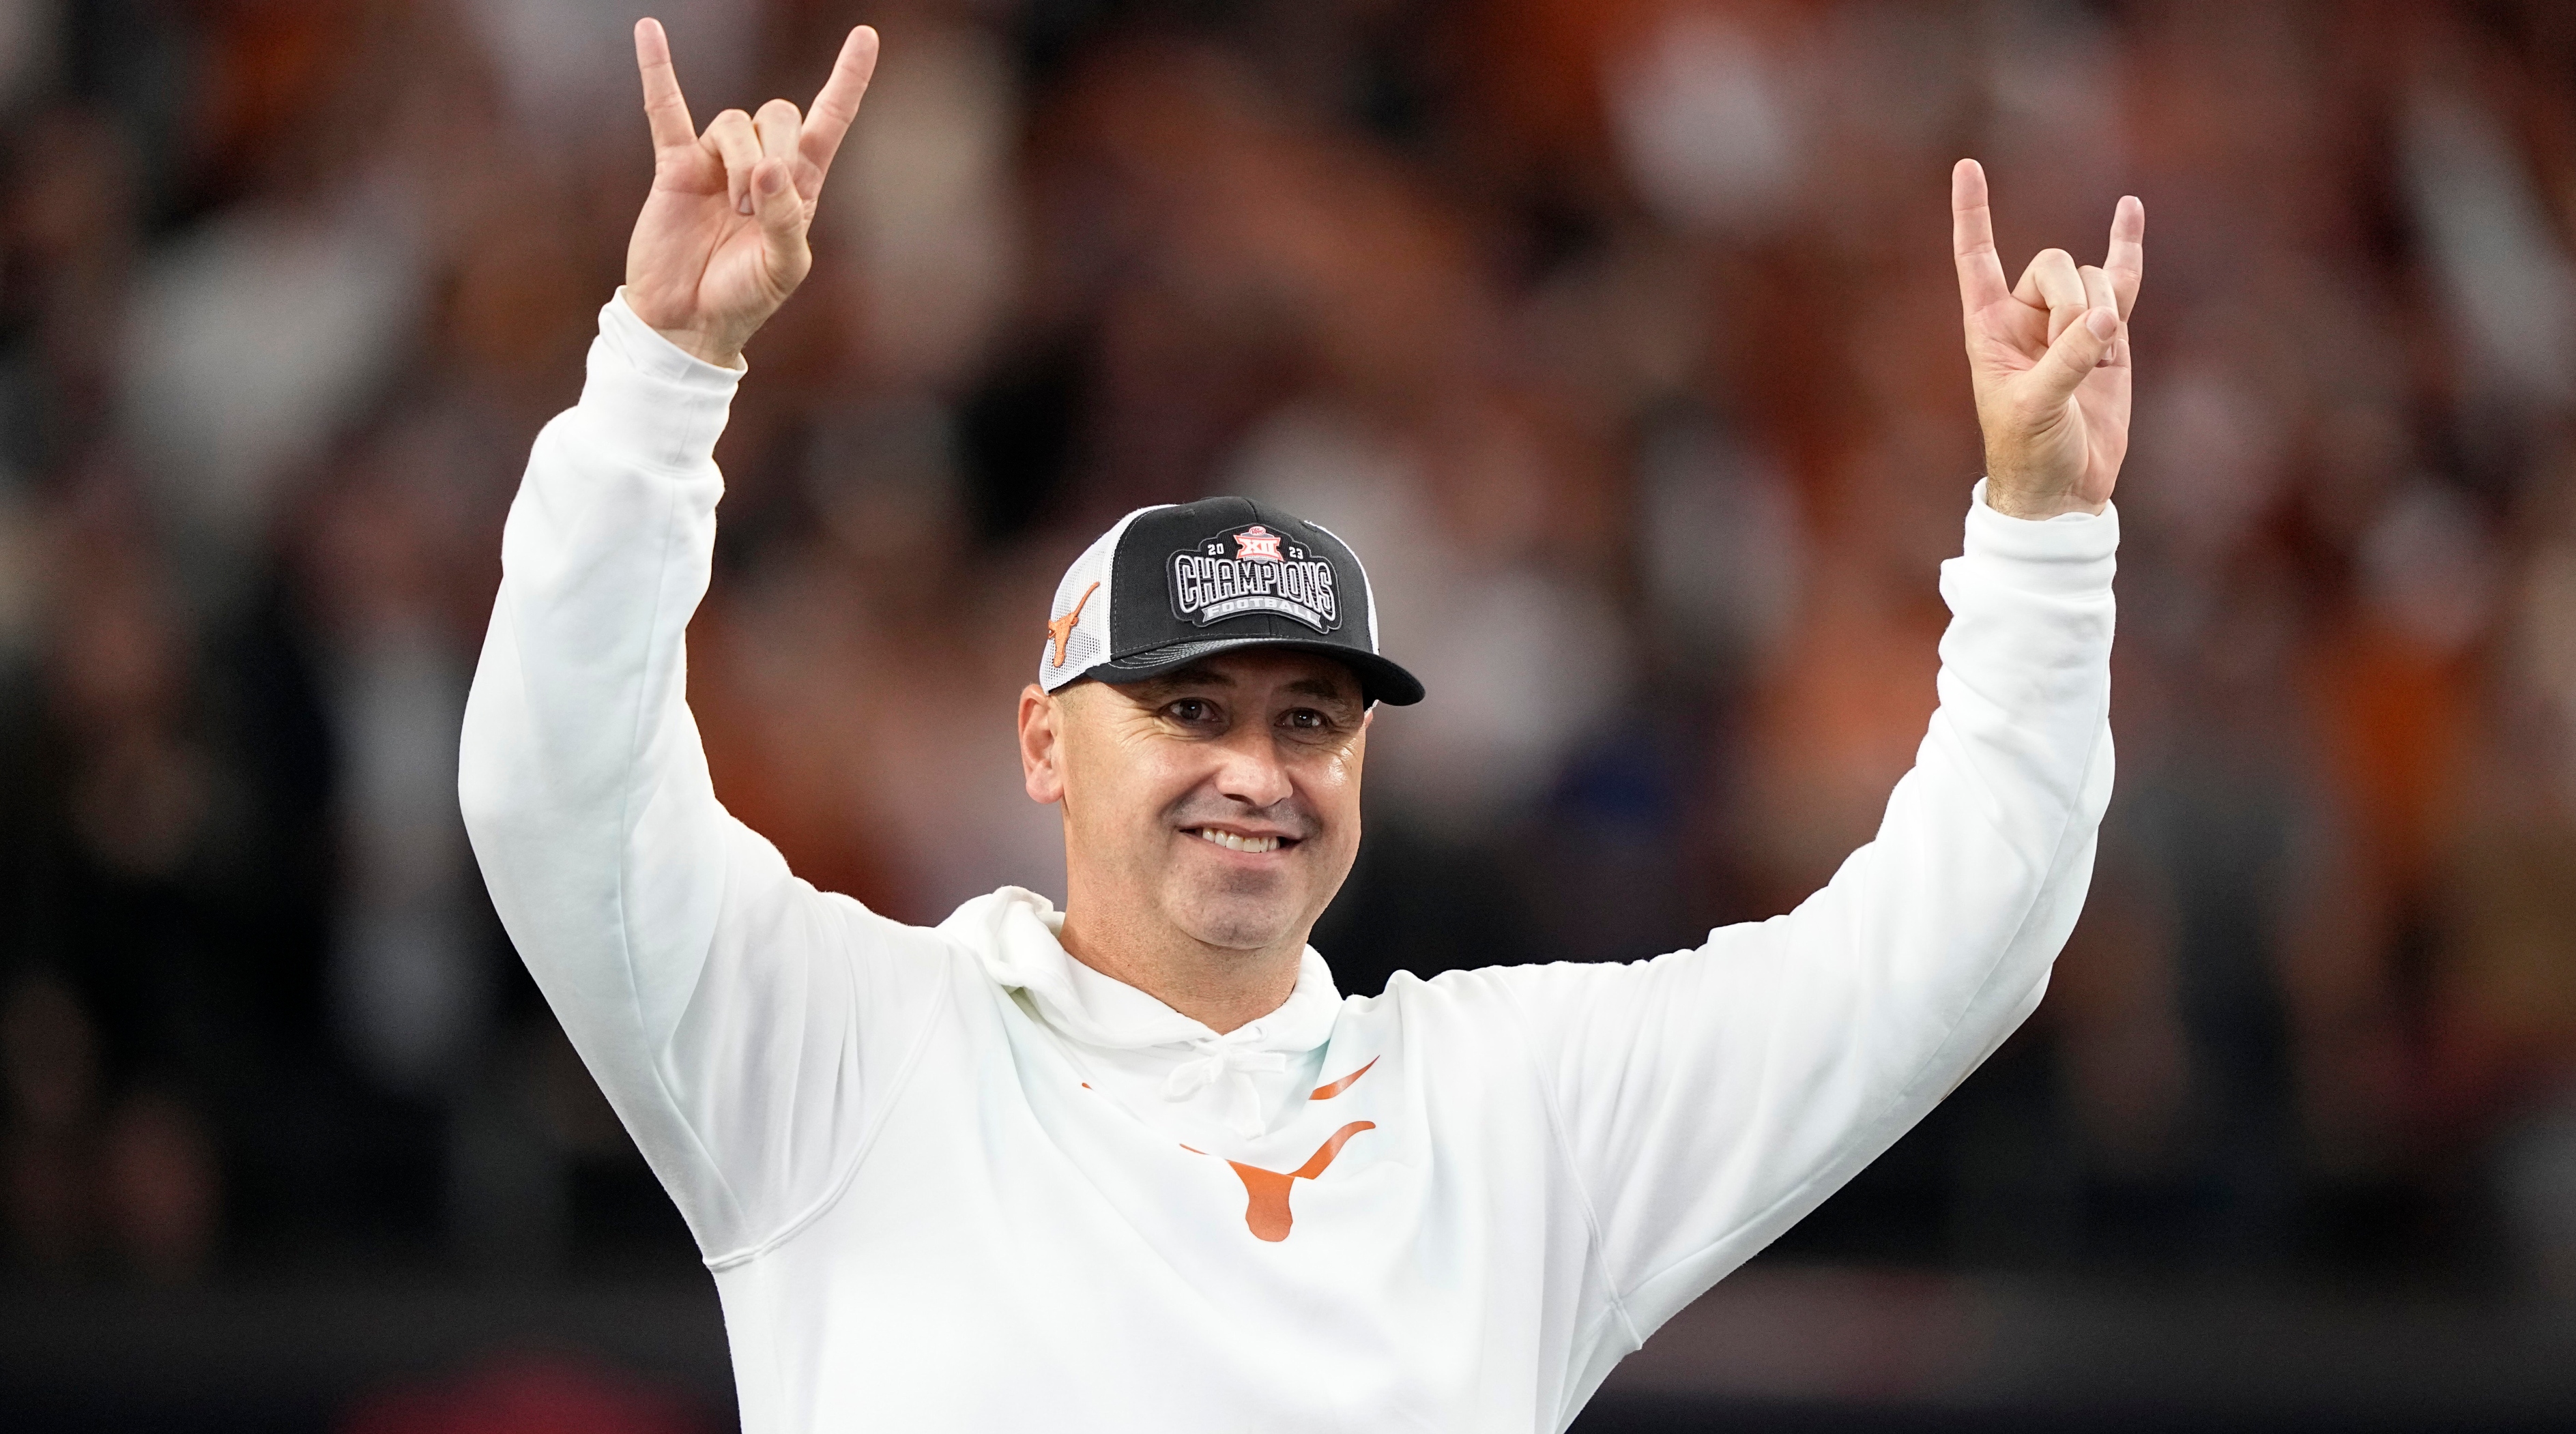 Texas football head coach Steve Sarkisian celebrates his team’s Big 12 championship victory by putting up the ‘Horns’ symbol with both hands.